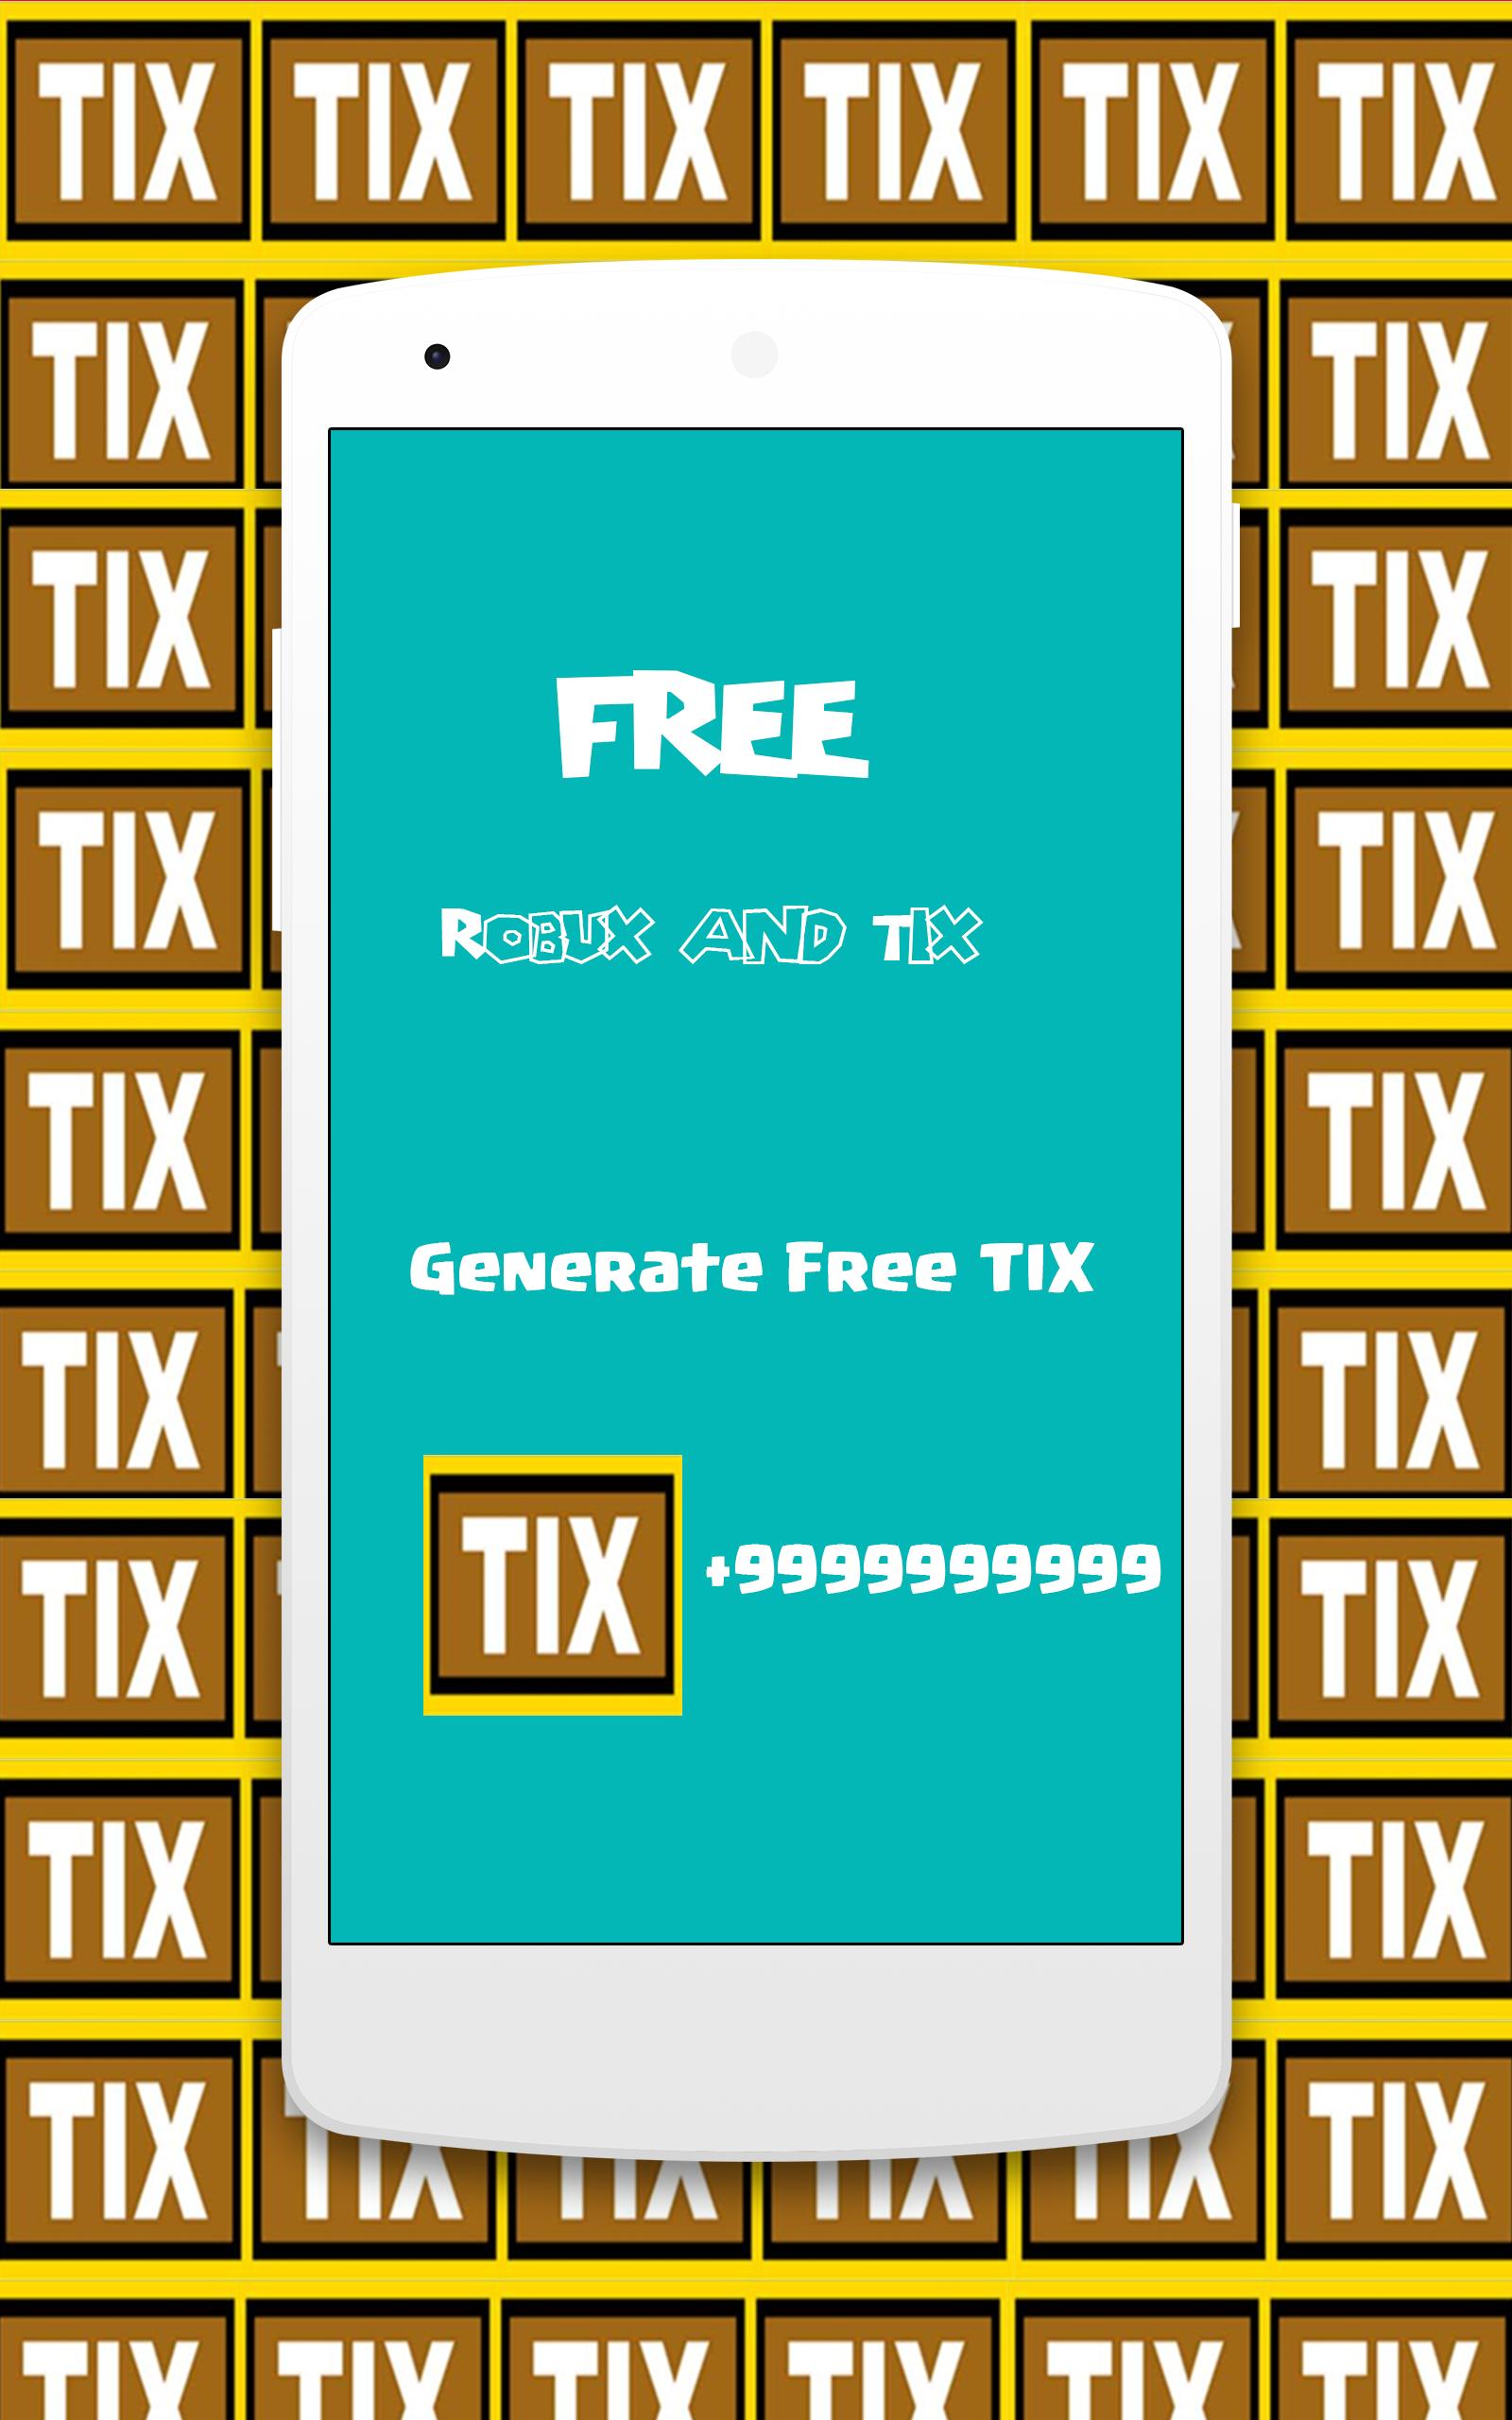 Robux And Tix Generator Prank For Android Apk Download - generator robux and tix